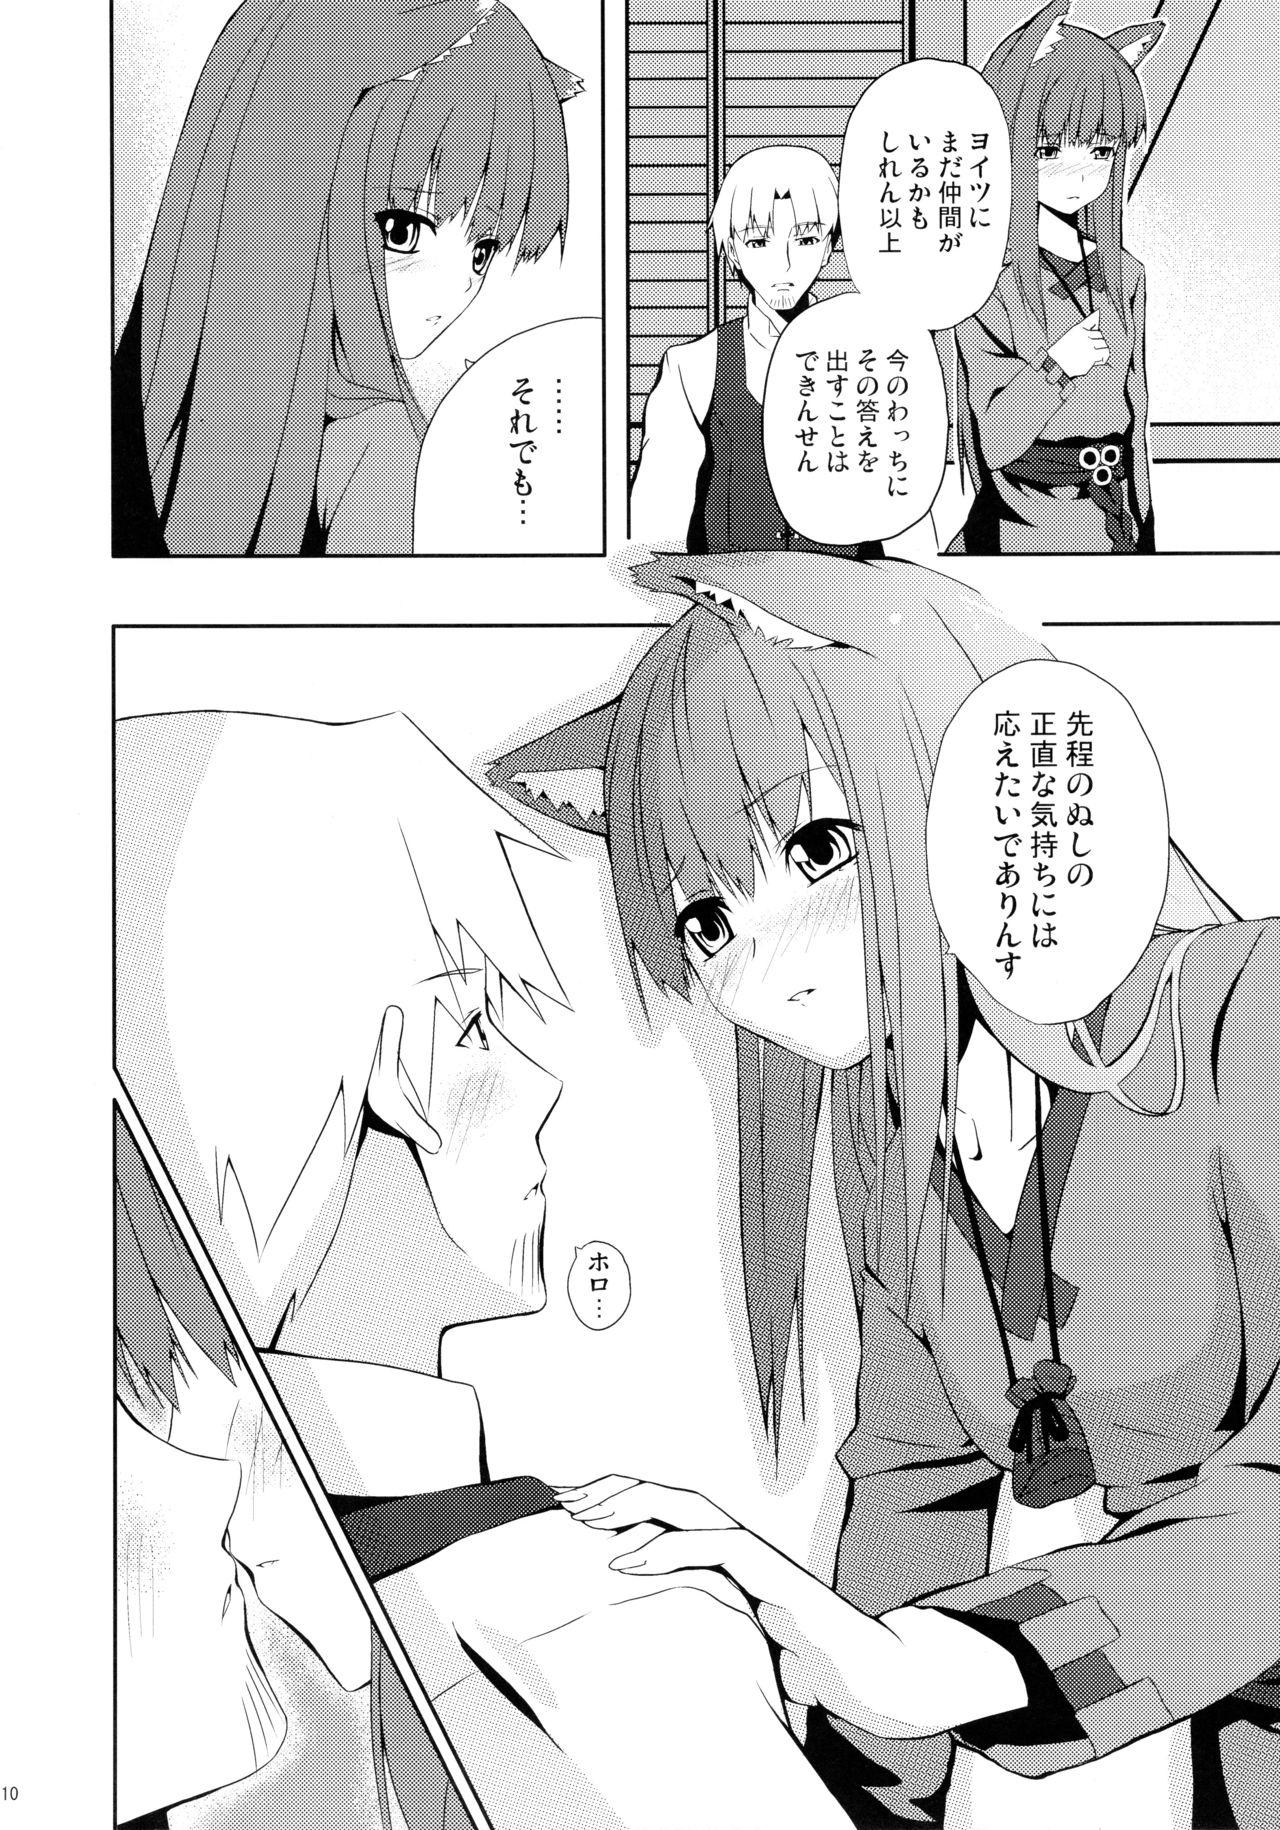 Blowjob Bitter Apple - Spice and wolf Old And Young - Page 10